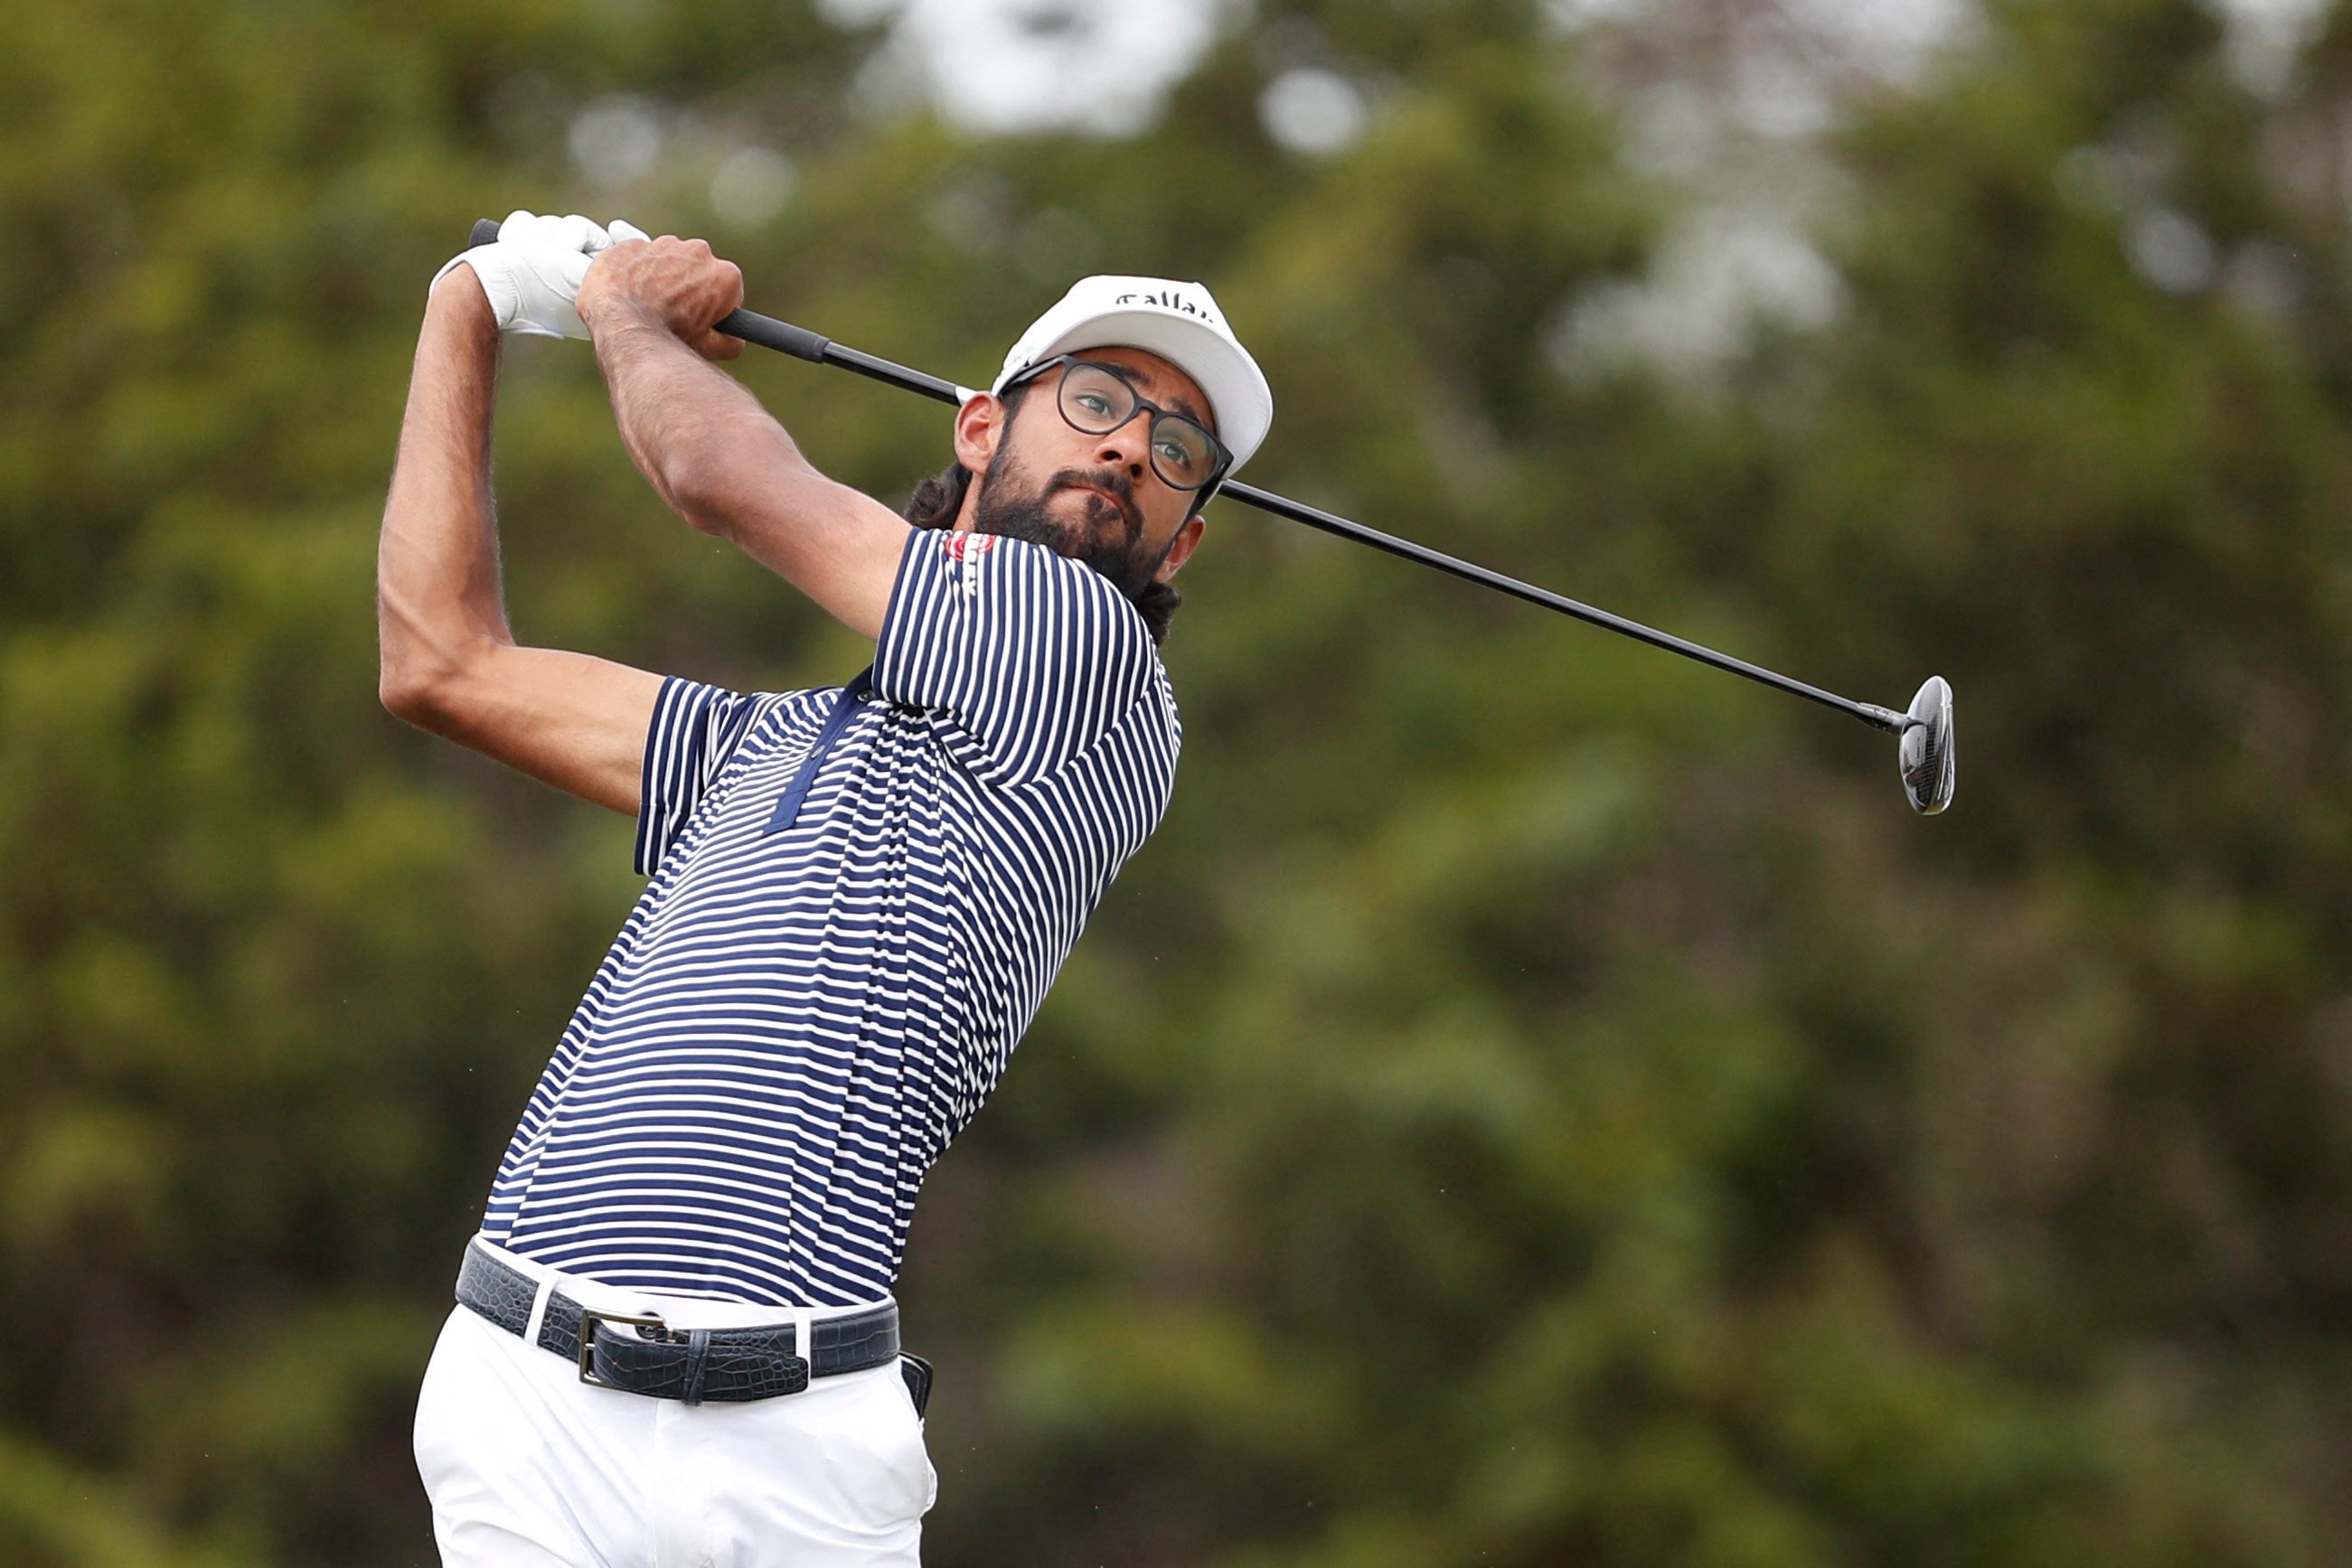 Akshay Bhatia was triumphant at the PGA Texas Open and hopes to back that up with an impressive performance at the Masters. Photo: Getty Images